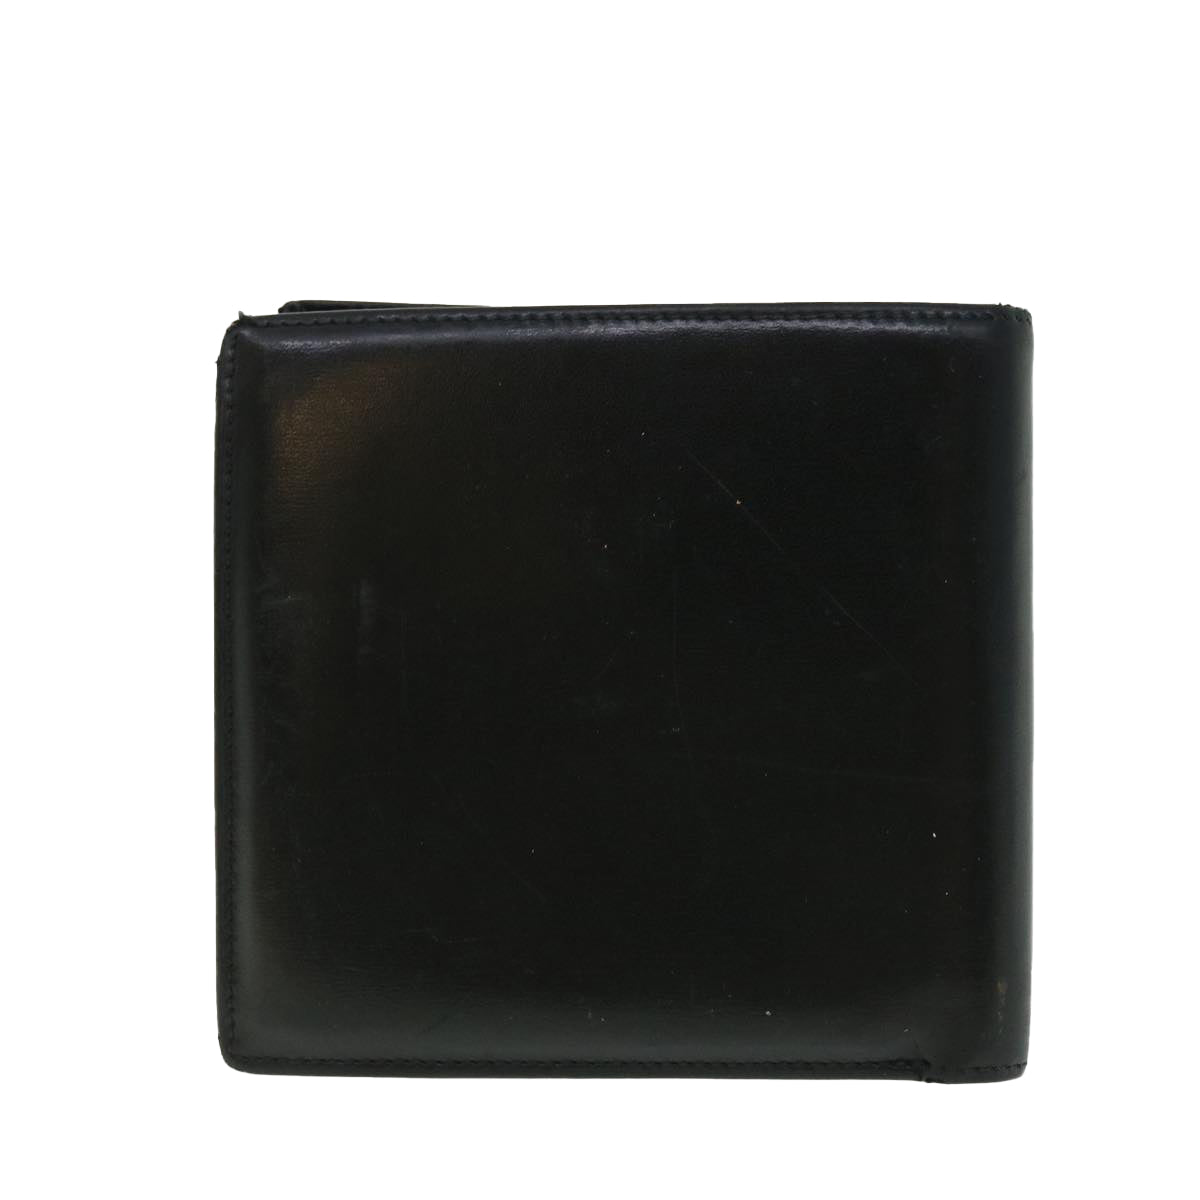 CARTIER Wallet Leather Black Auth 50851 - 0